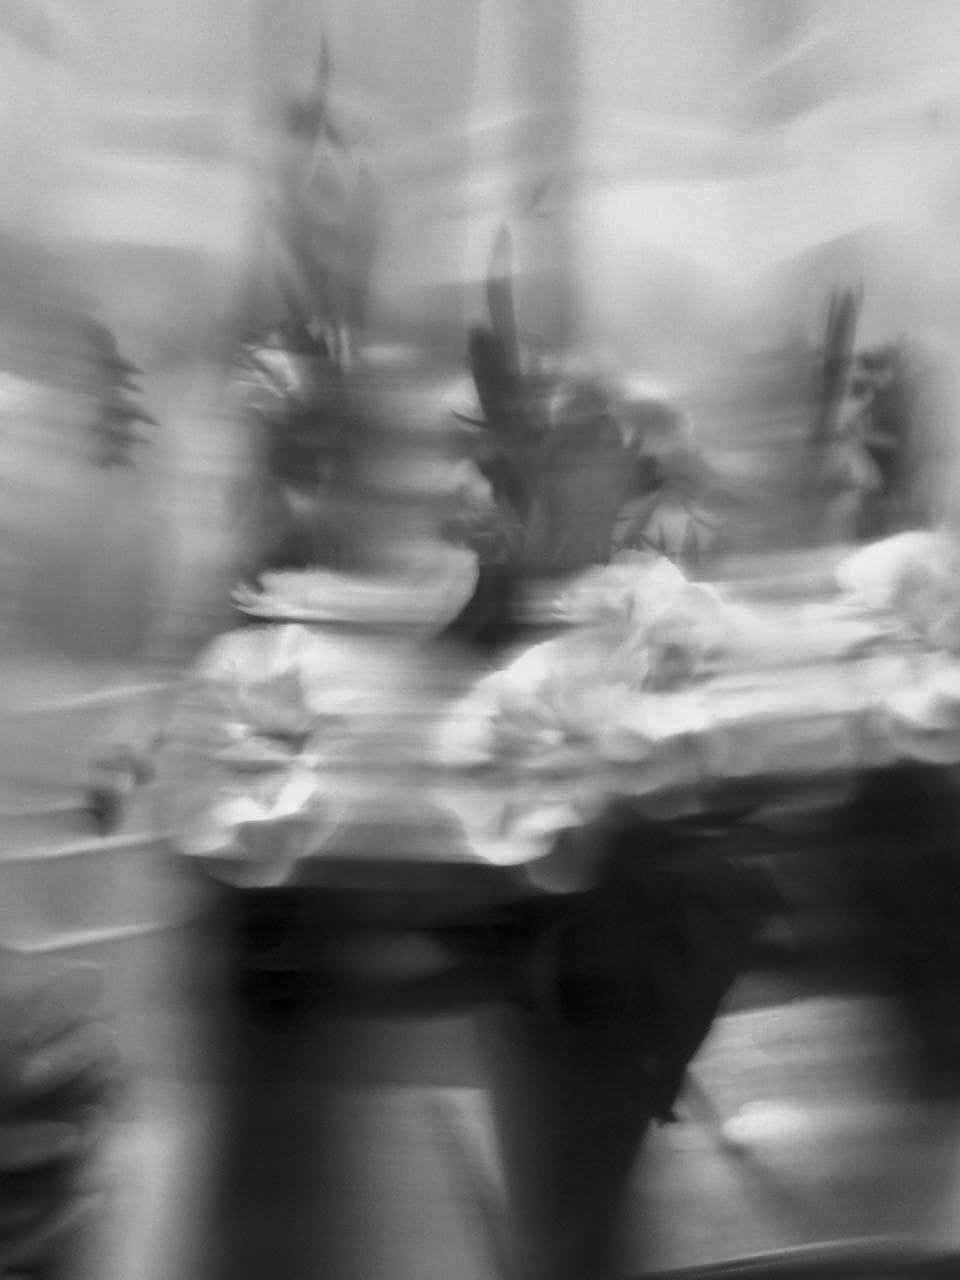 blurred motion, motion, black and white, white, monochrome, monochrome photography, speed, defocused, adult, group of people, transportation, on the move, black, city, architecture, men